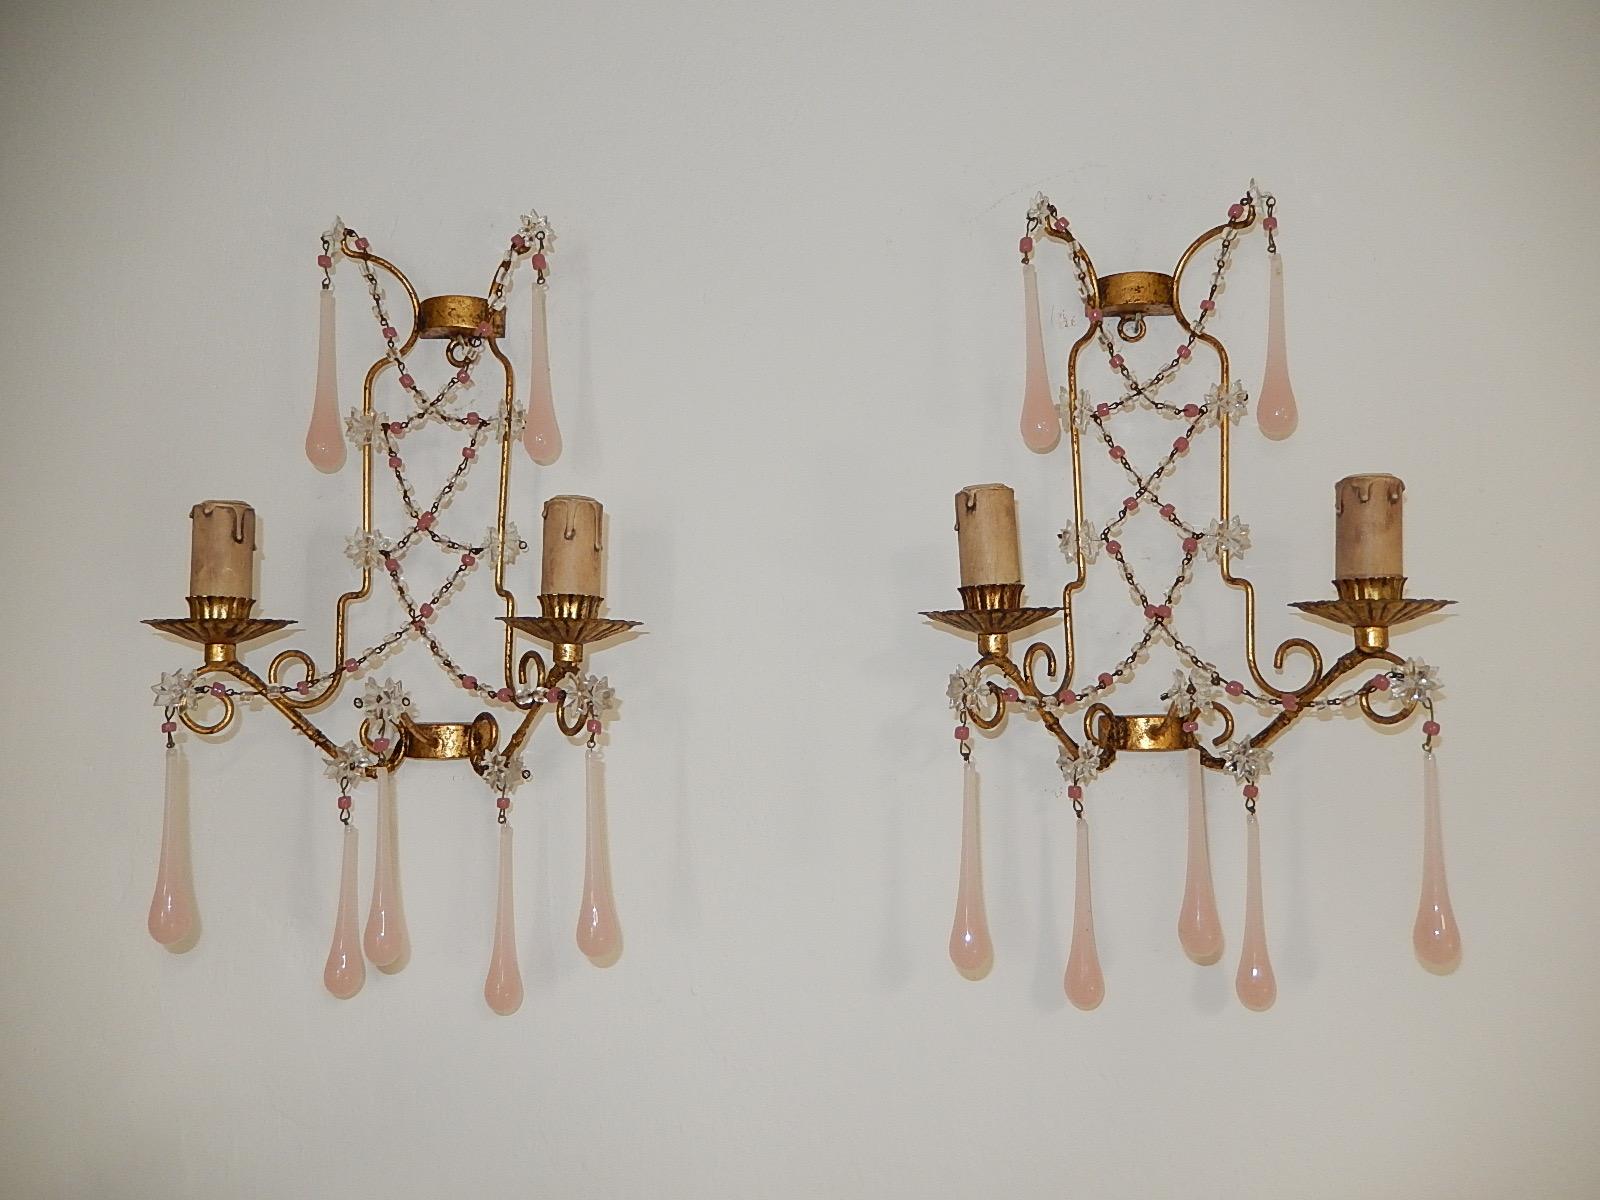 Housing 2-light, sitting in crystal bobeches. Will be re-wired with appropriate sockets for country and ready to hang! Swags of pink opaline and clear beads and star prisms. Adorning Murano pink opaline drops. Free priority UPS shipping from Italy,